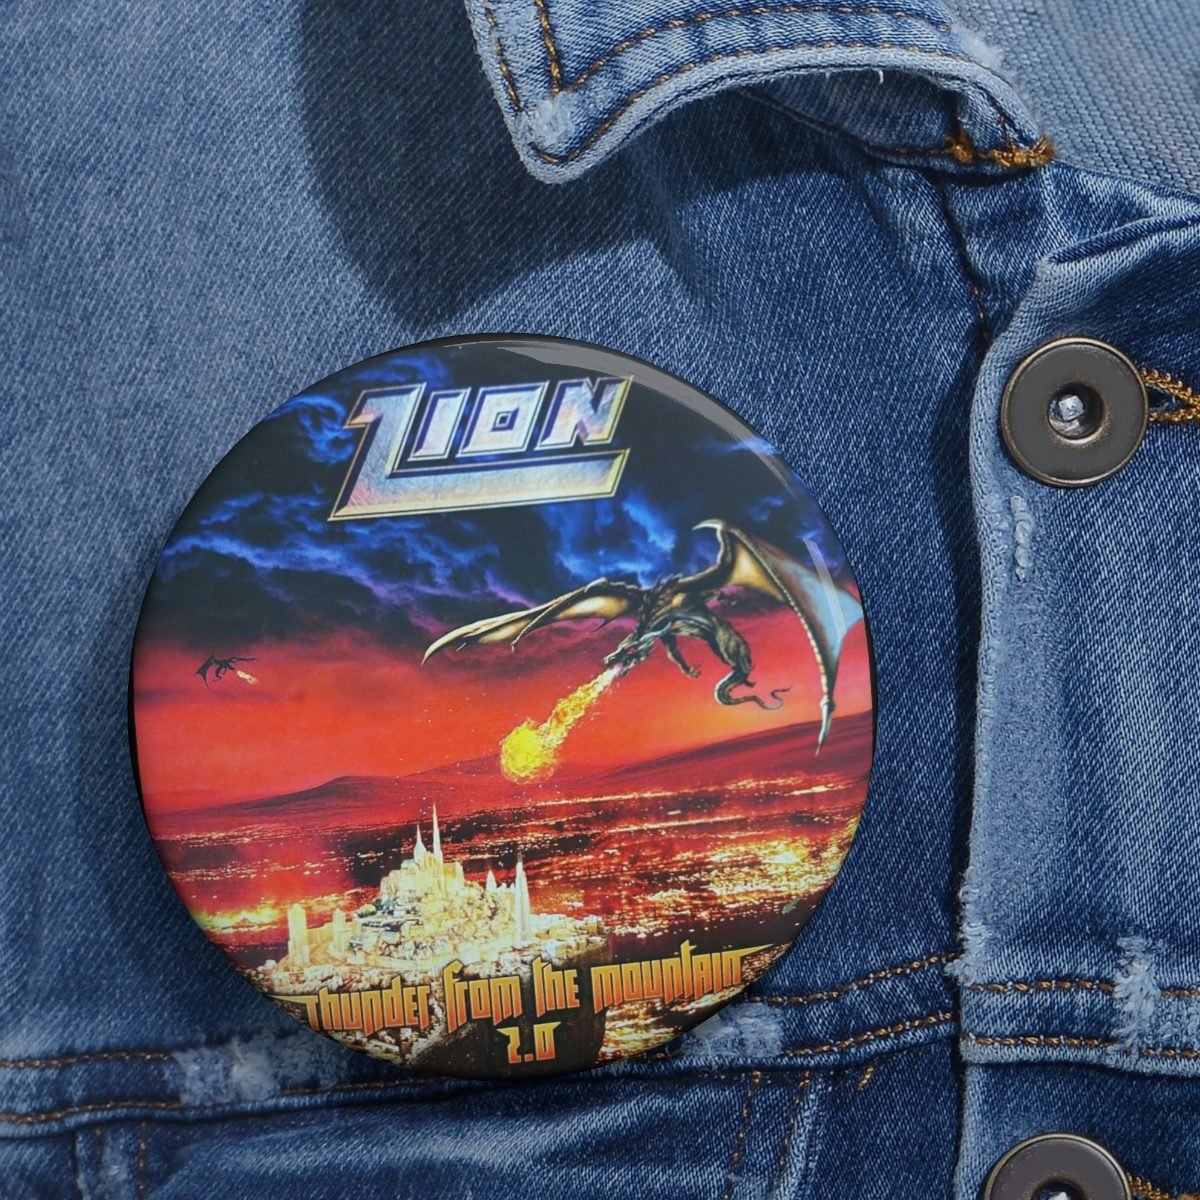 Zion – Thunder From The Mountain 2.0 Pin Buttons